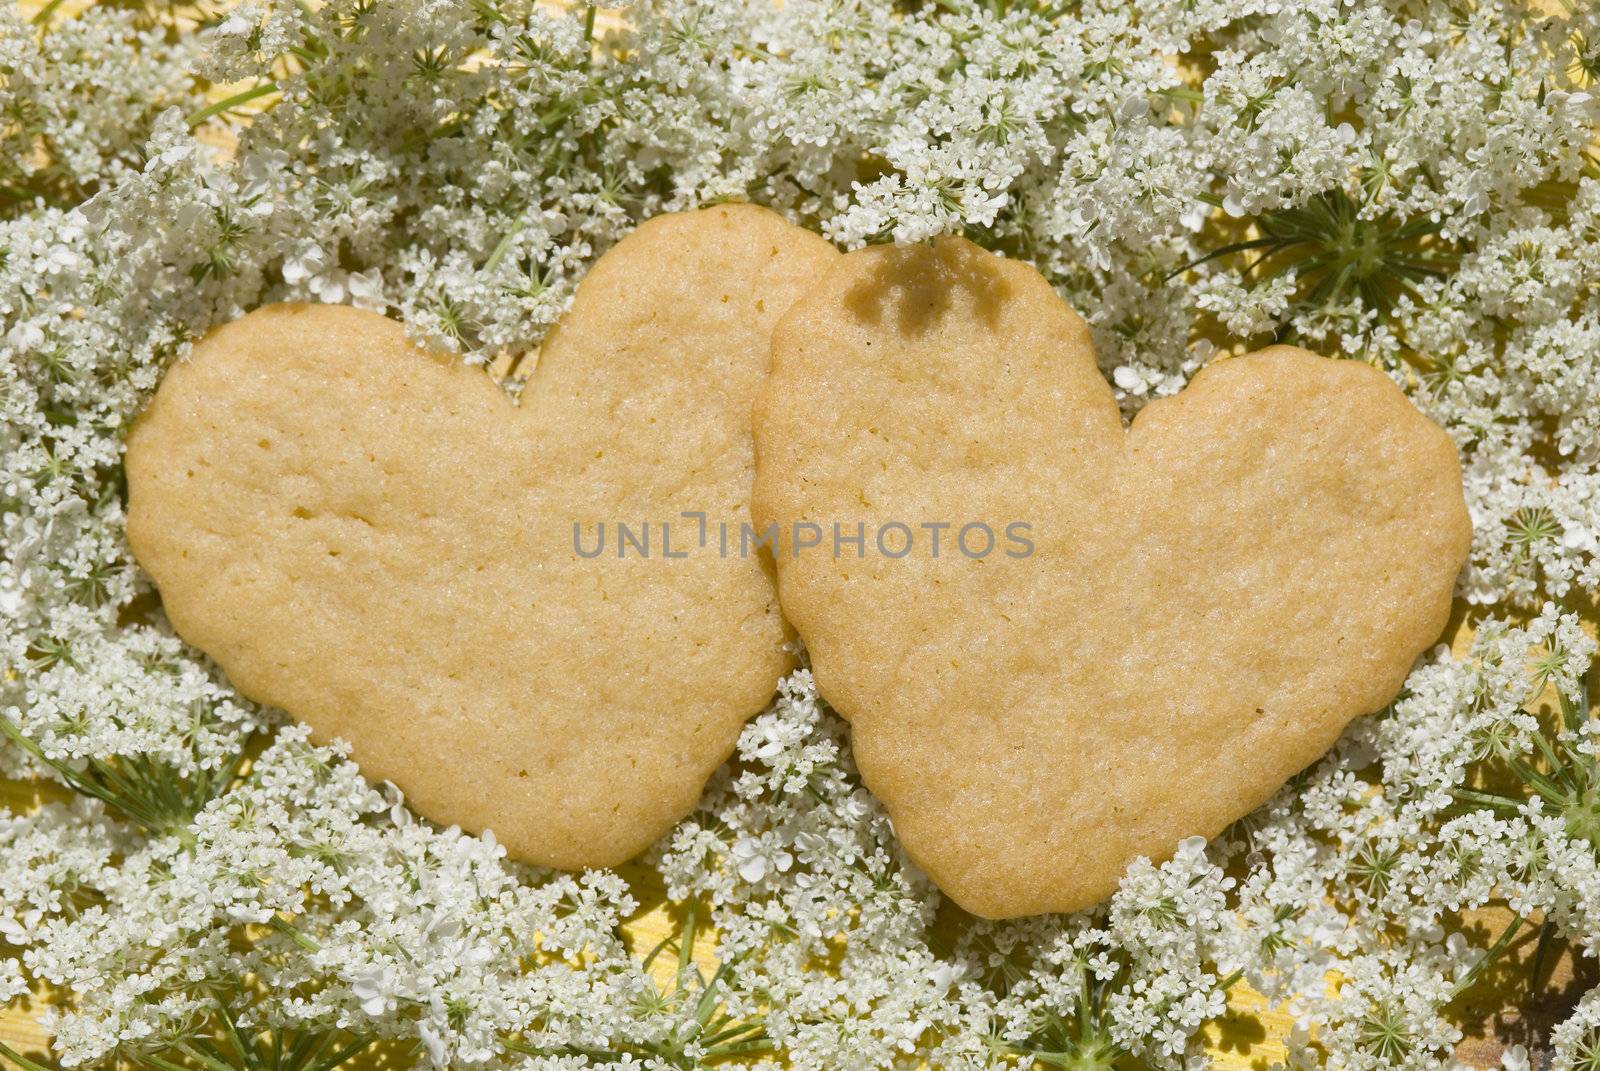 shortbread delicious heart-shaped by Carche